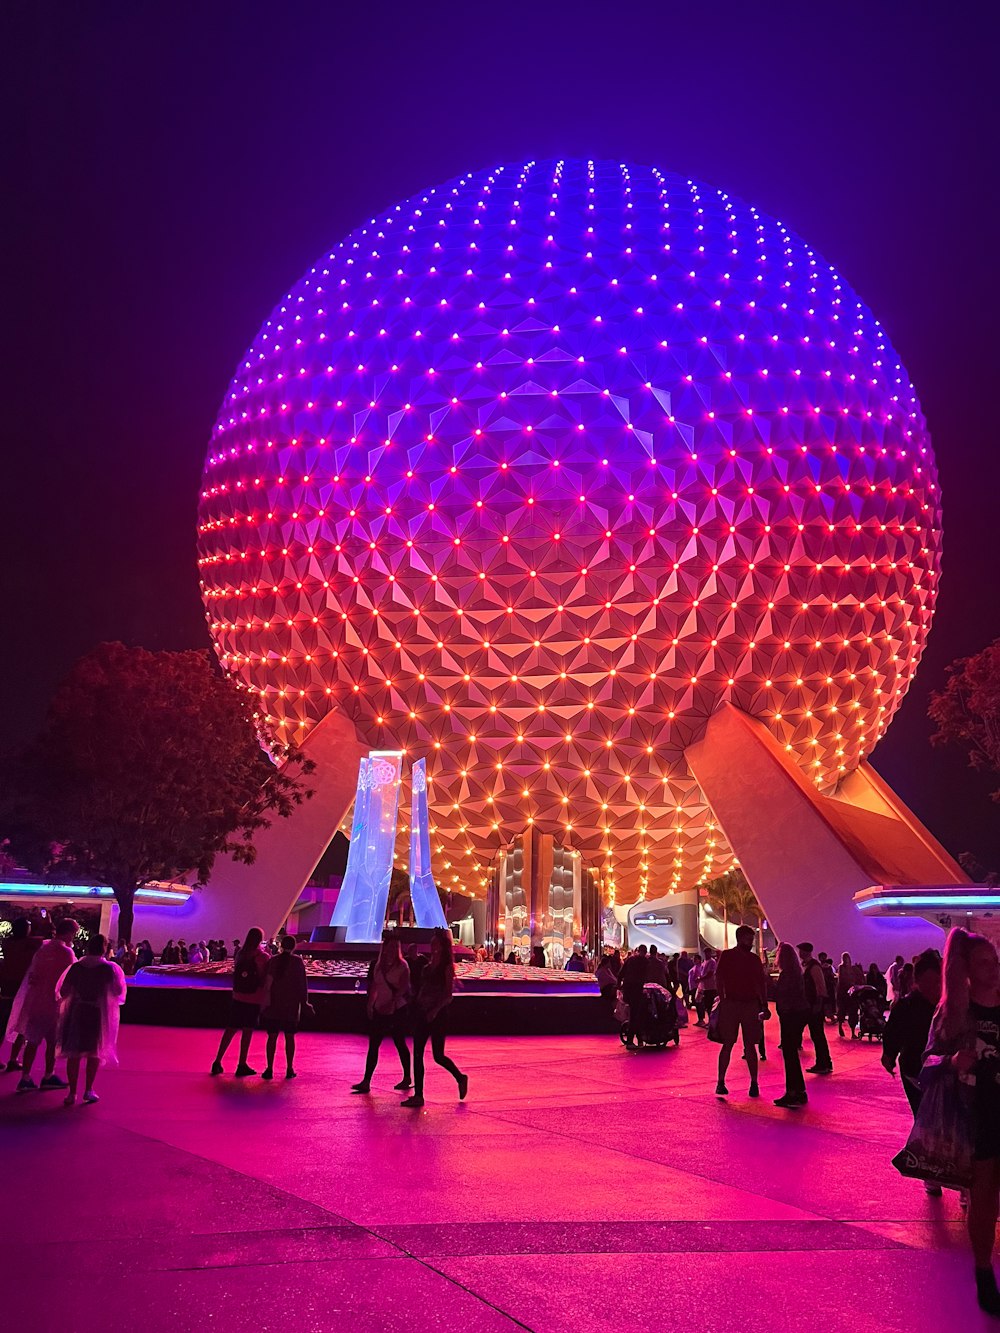 people are walking around in front of a large ball